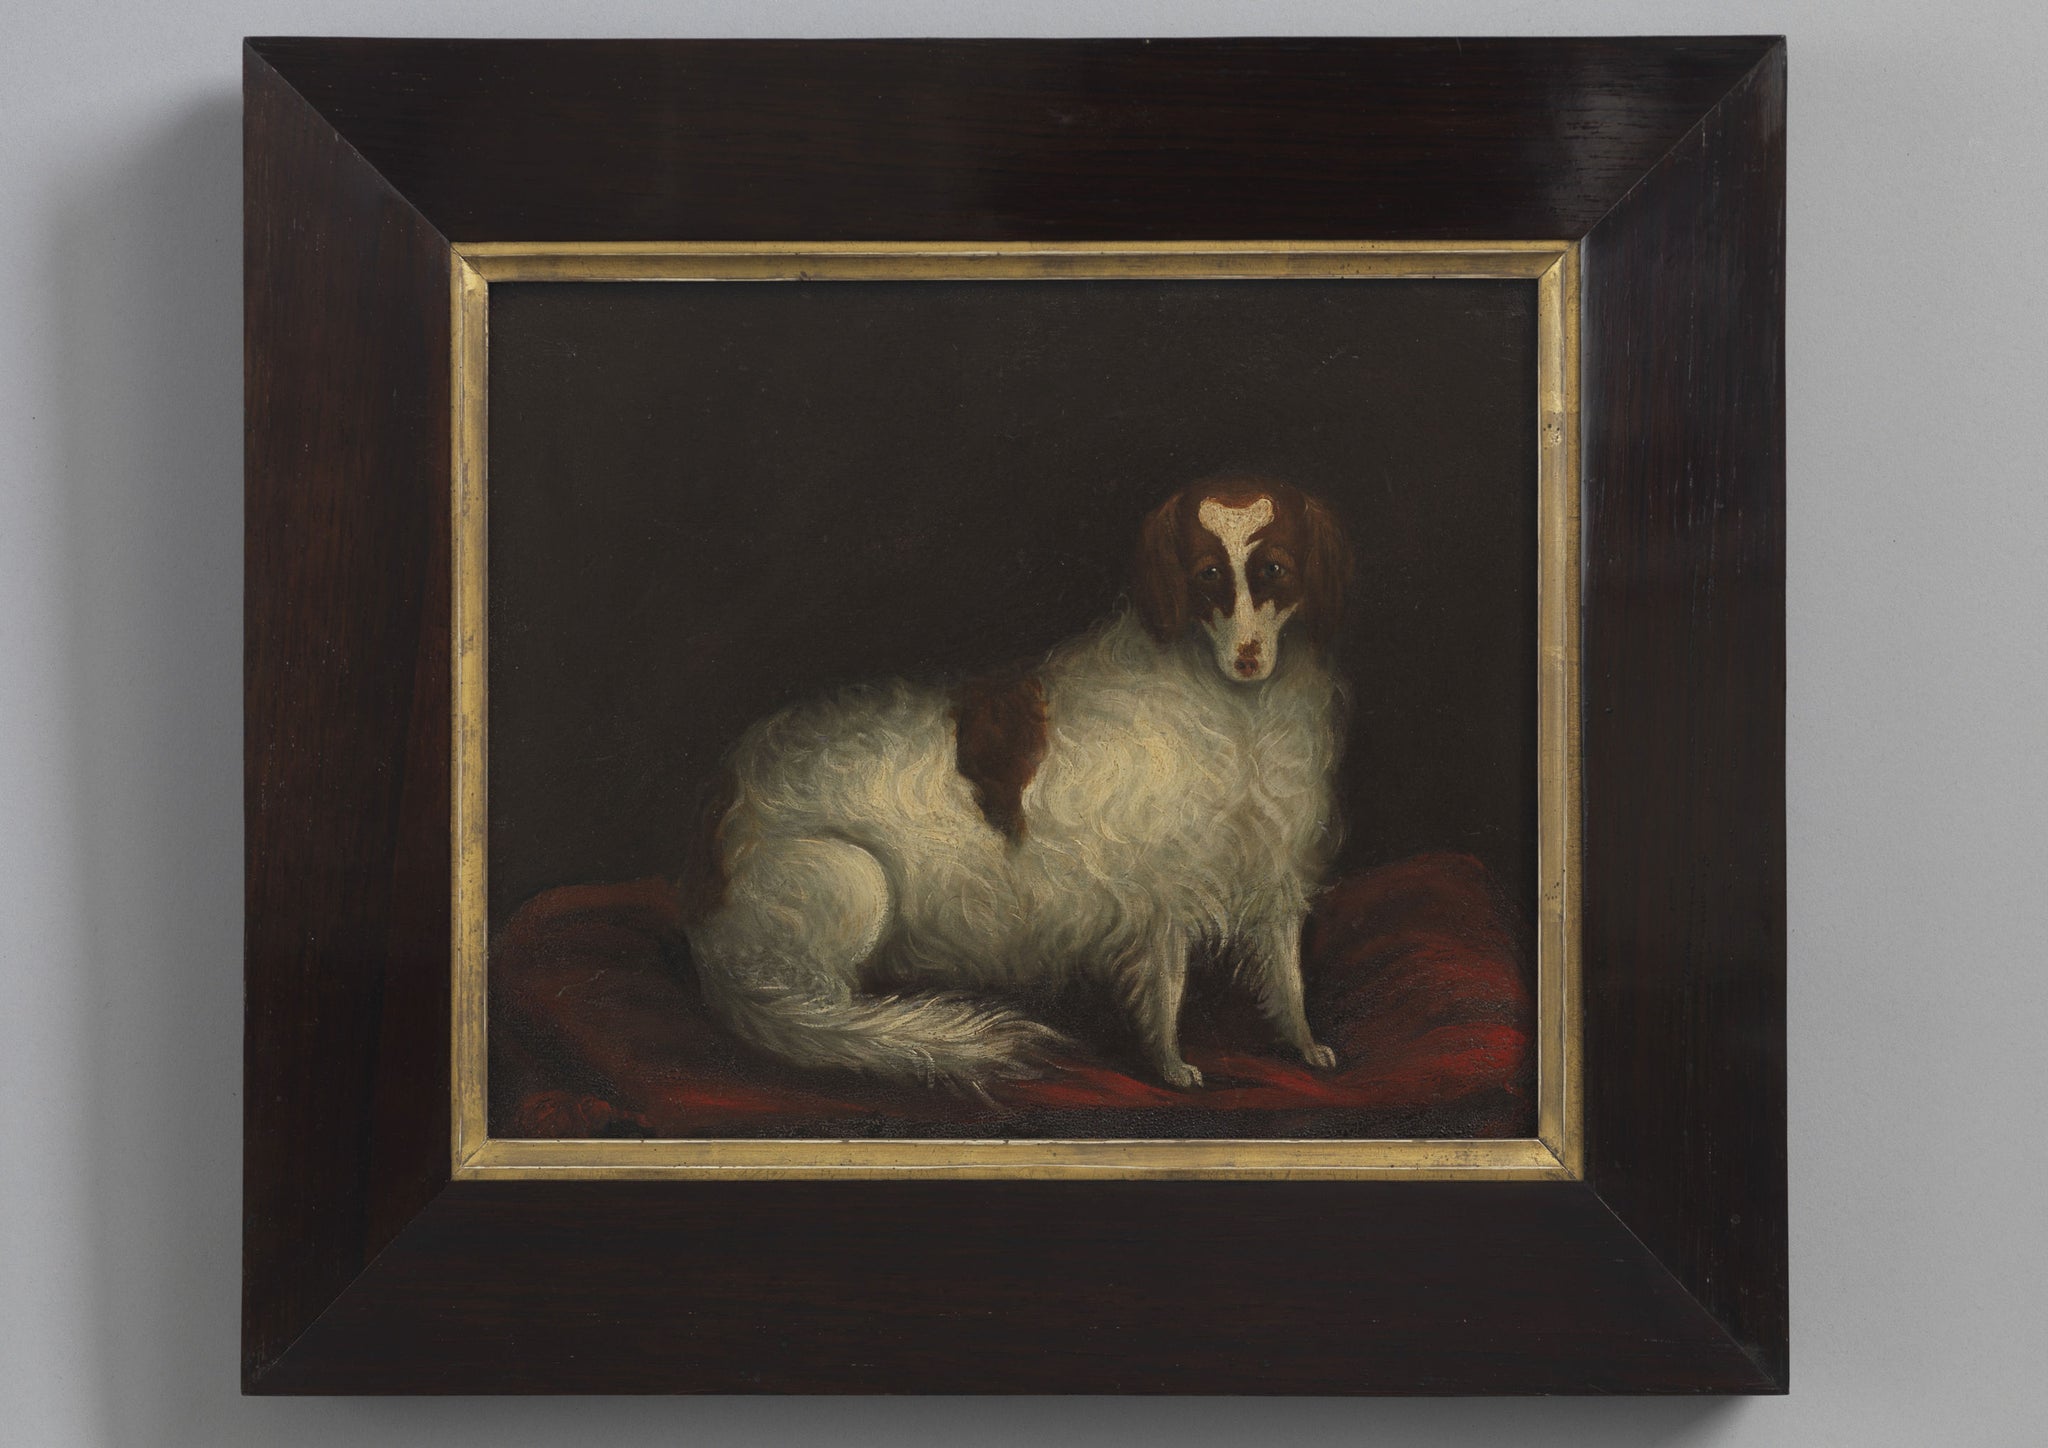 Spaniel Seated on a Red Cushion